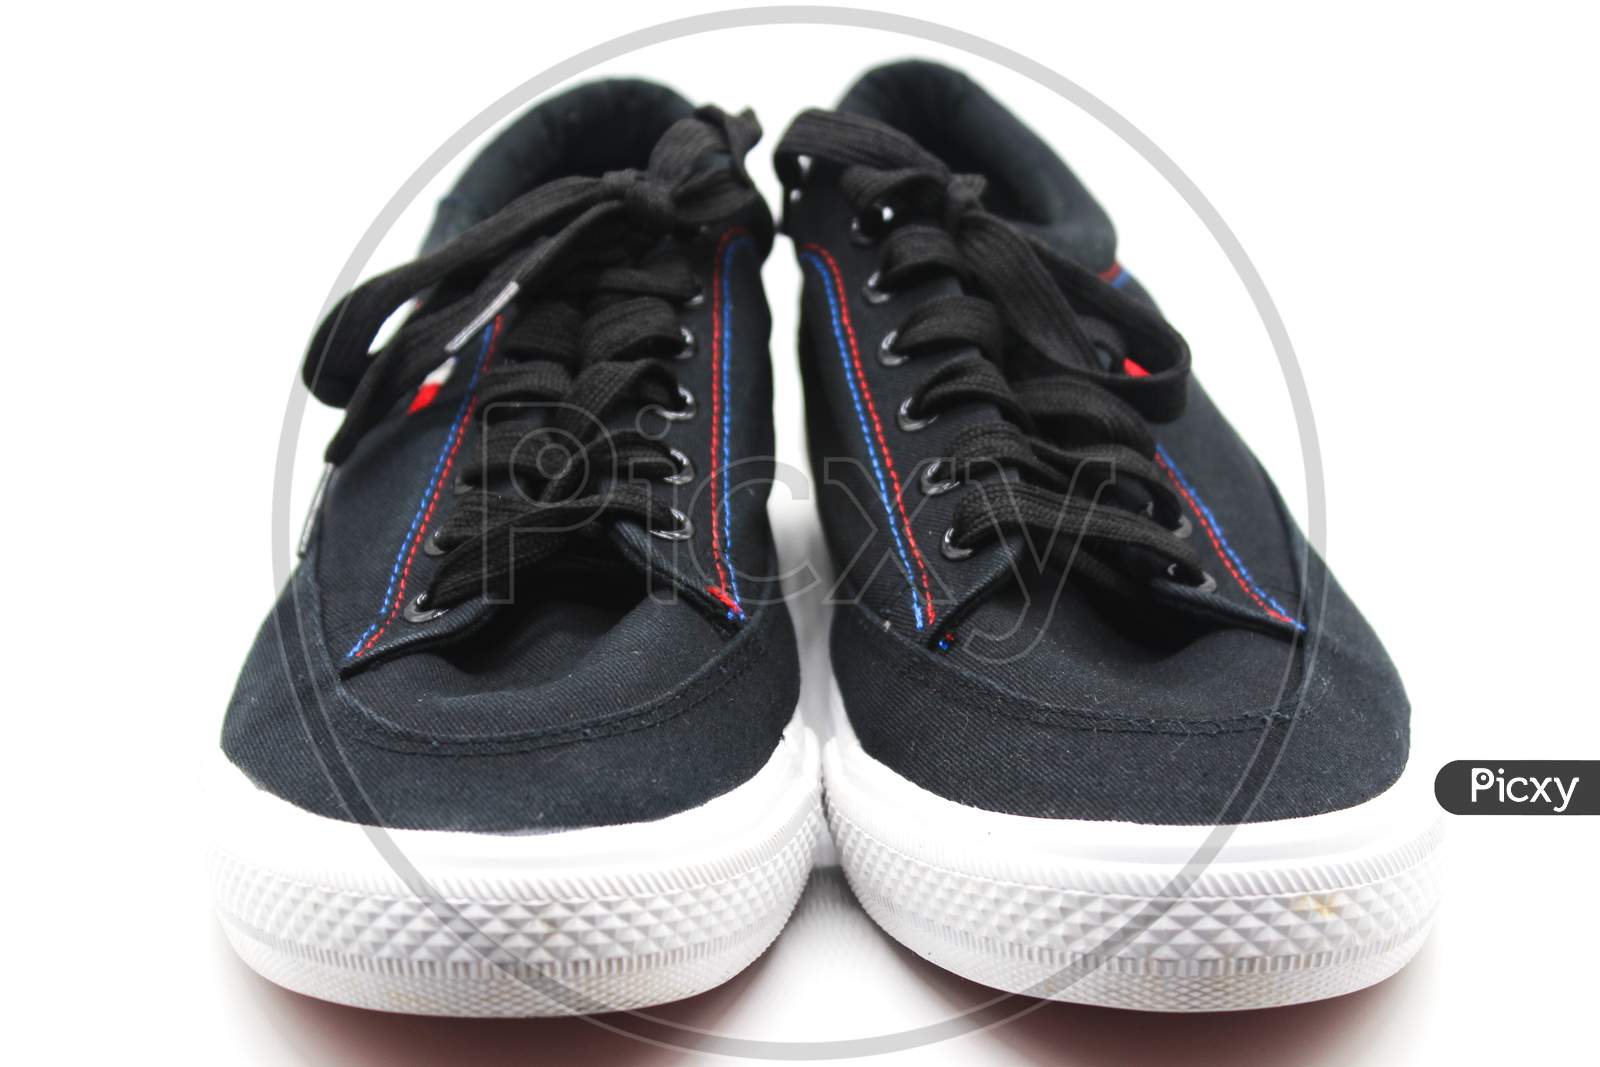 Black Shose For Men On White Background With Selective Focus